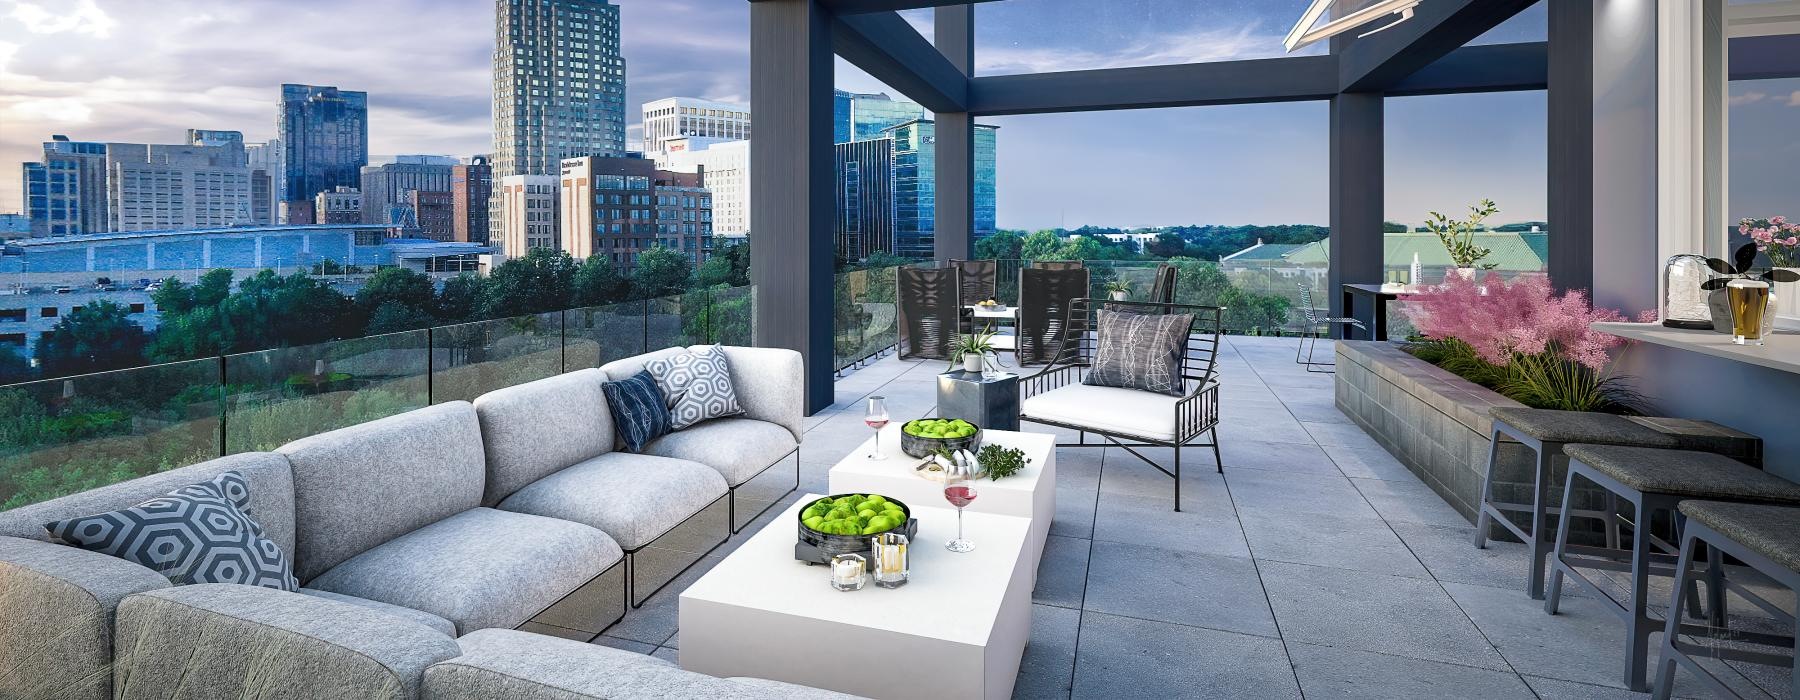 rooftop terrace with city views